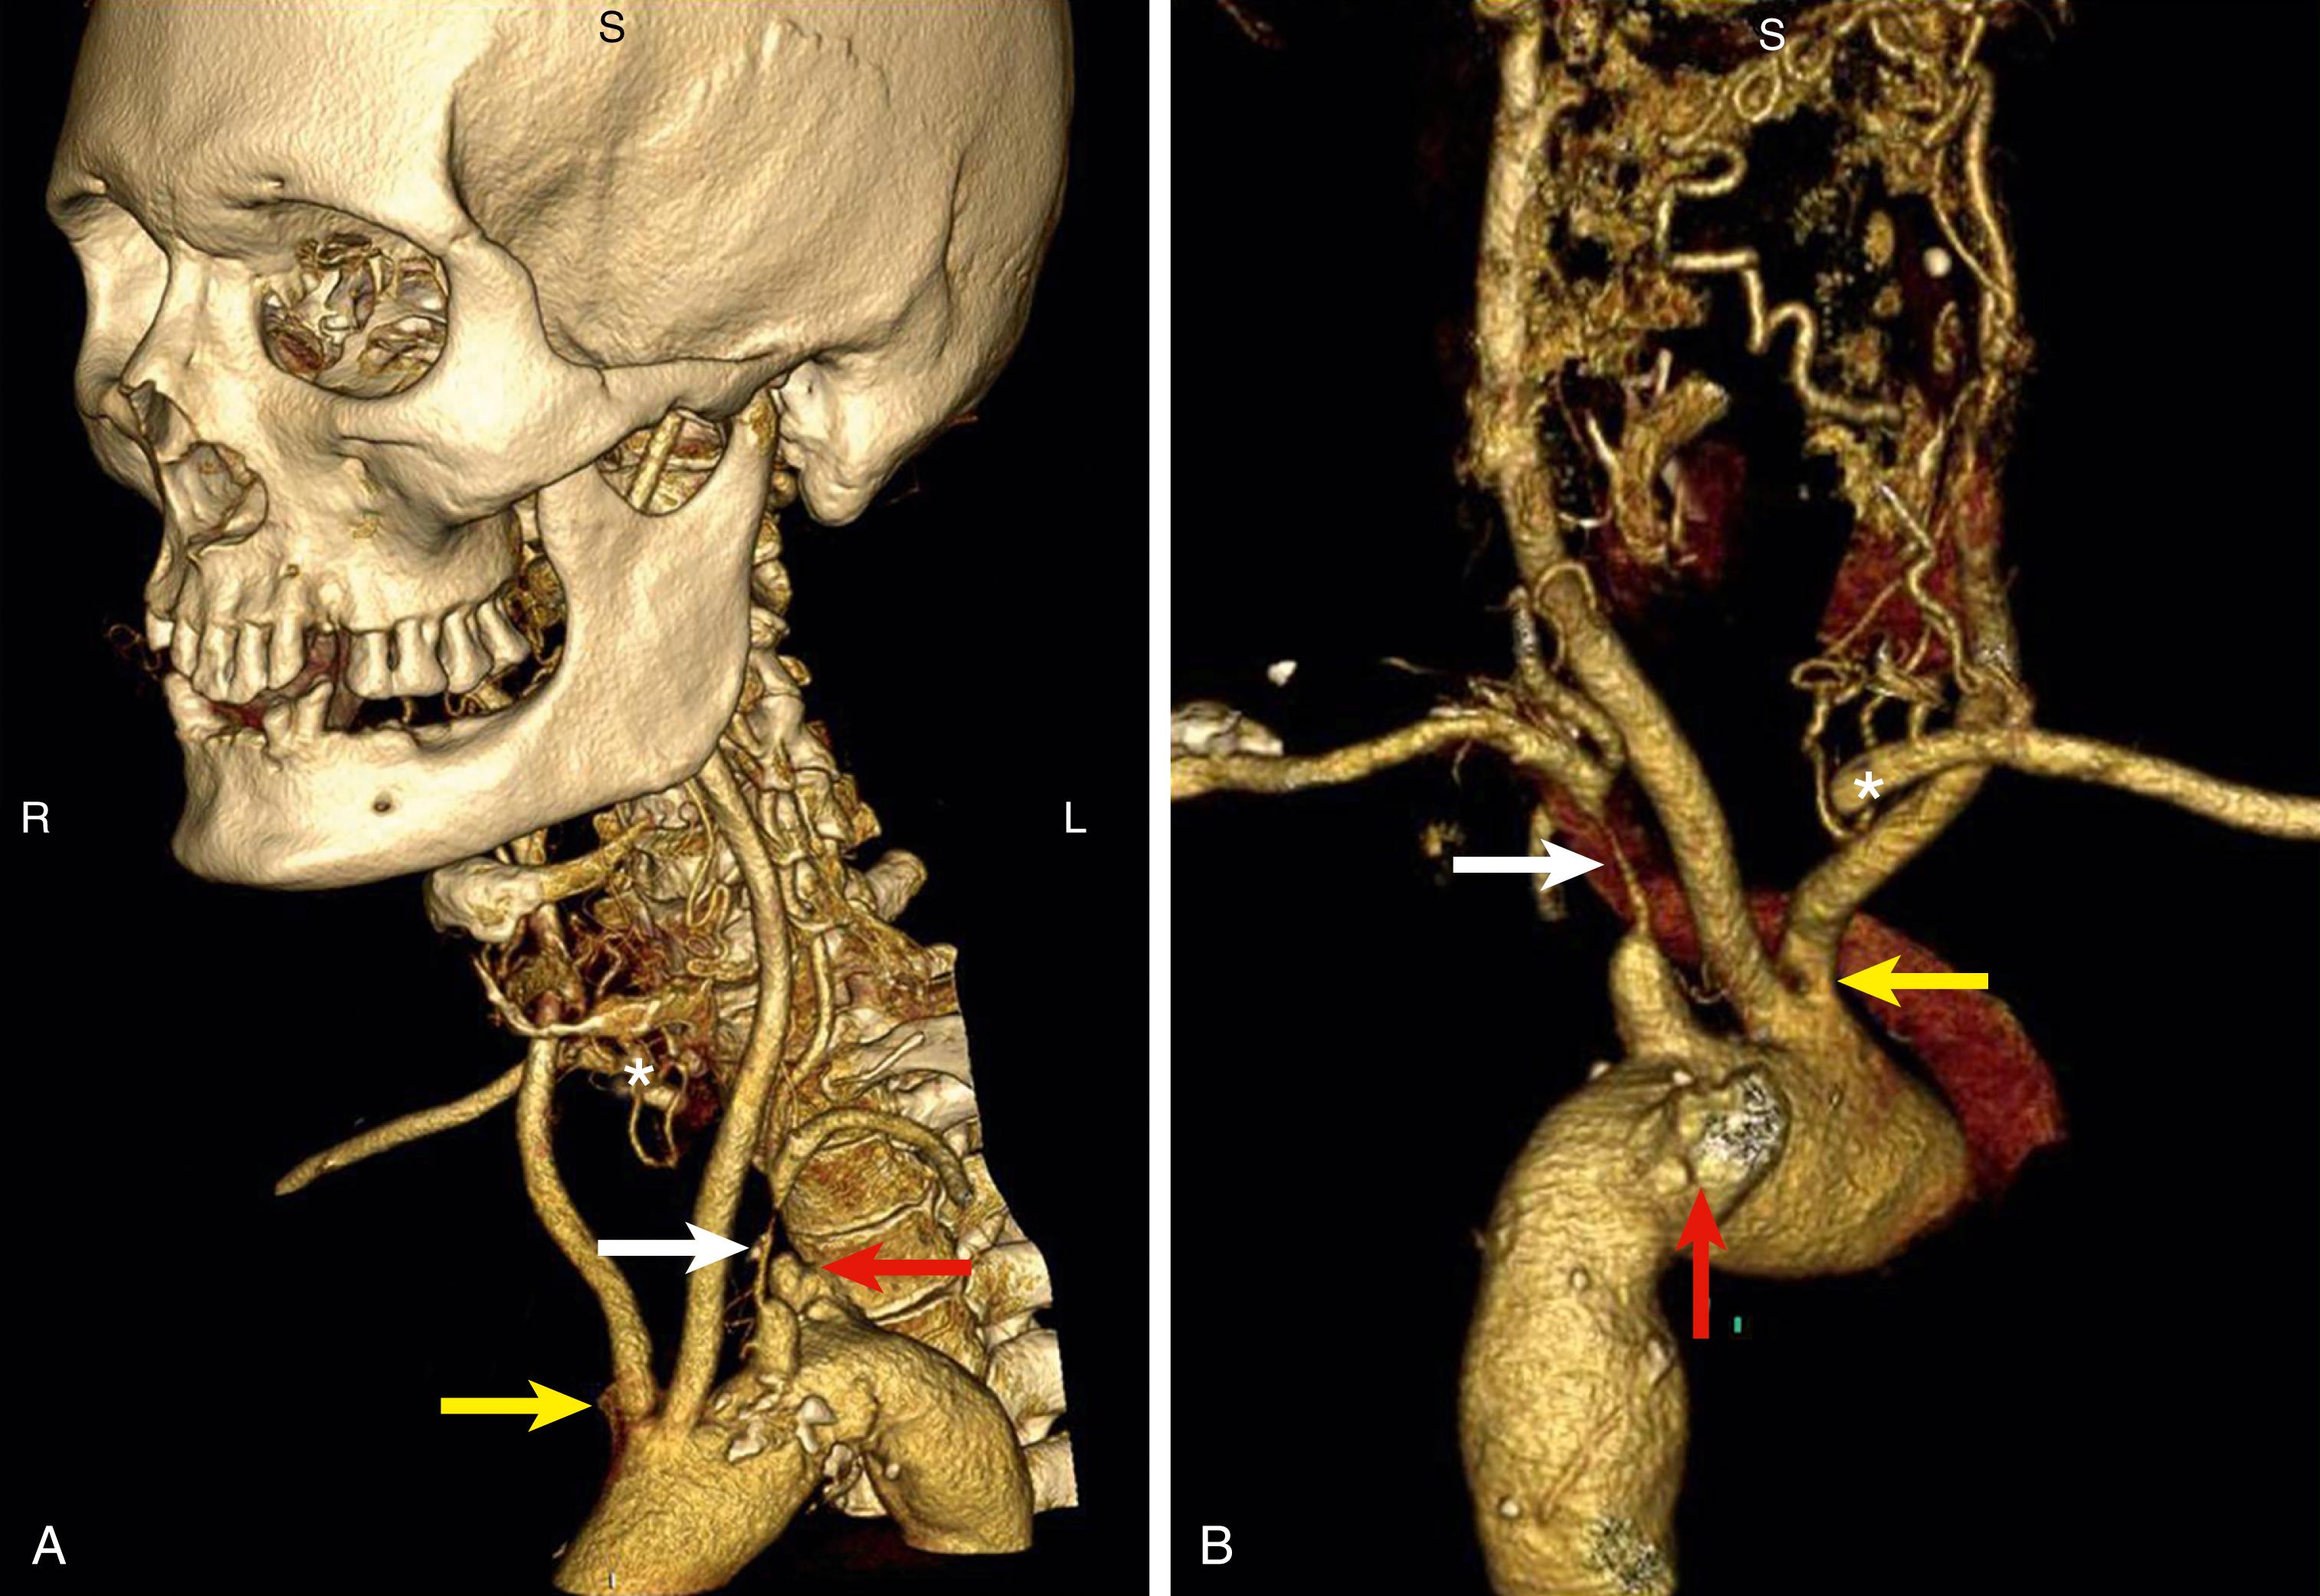 Figure 91.1, Multidetector computed tomographic angiography showing an unexpected anomaly of the great vessels of the aortic arch. ( A ) Arch viewed from its anterior aspect. ( B ) Arch viewed from its posterior aspect. Both common carotid arteries arise from a joint origin (yellow arrow) , and there is a long, severe stenosis of the proximal left subclavian artery (white arrow) . The right subclavian artery arises from an aberrant position and is occluded just beyond its origin (red arrow) with refilling distally (asterisk) . The red arrow marks the “diverticulum of Kommerl.”